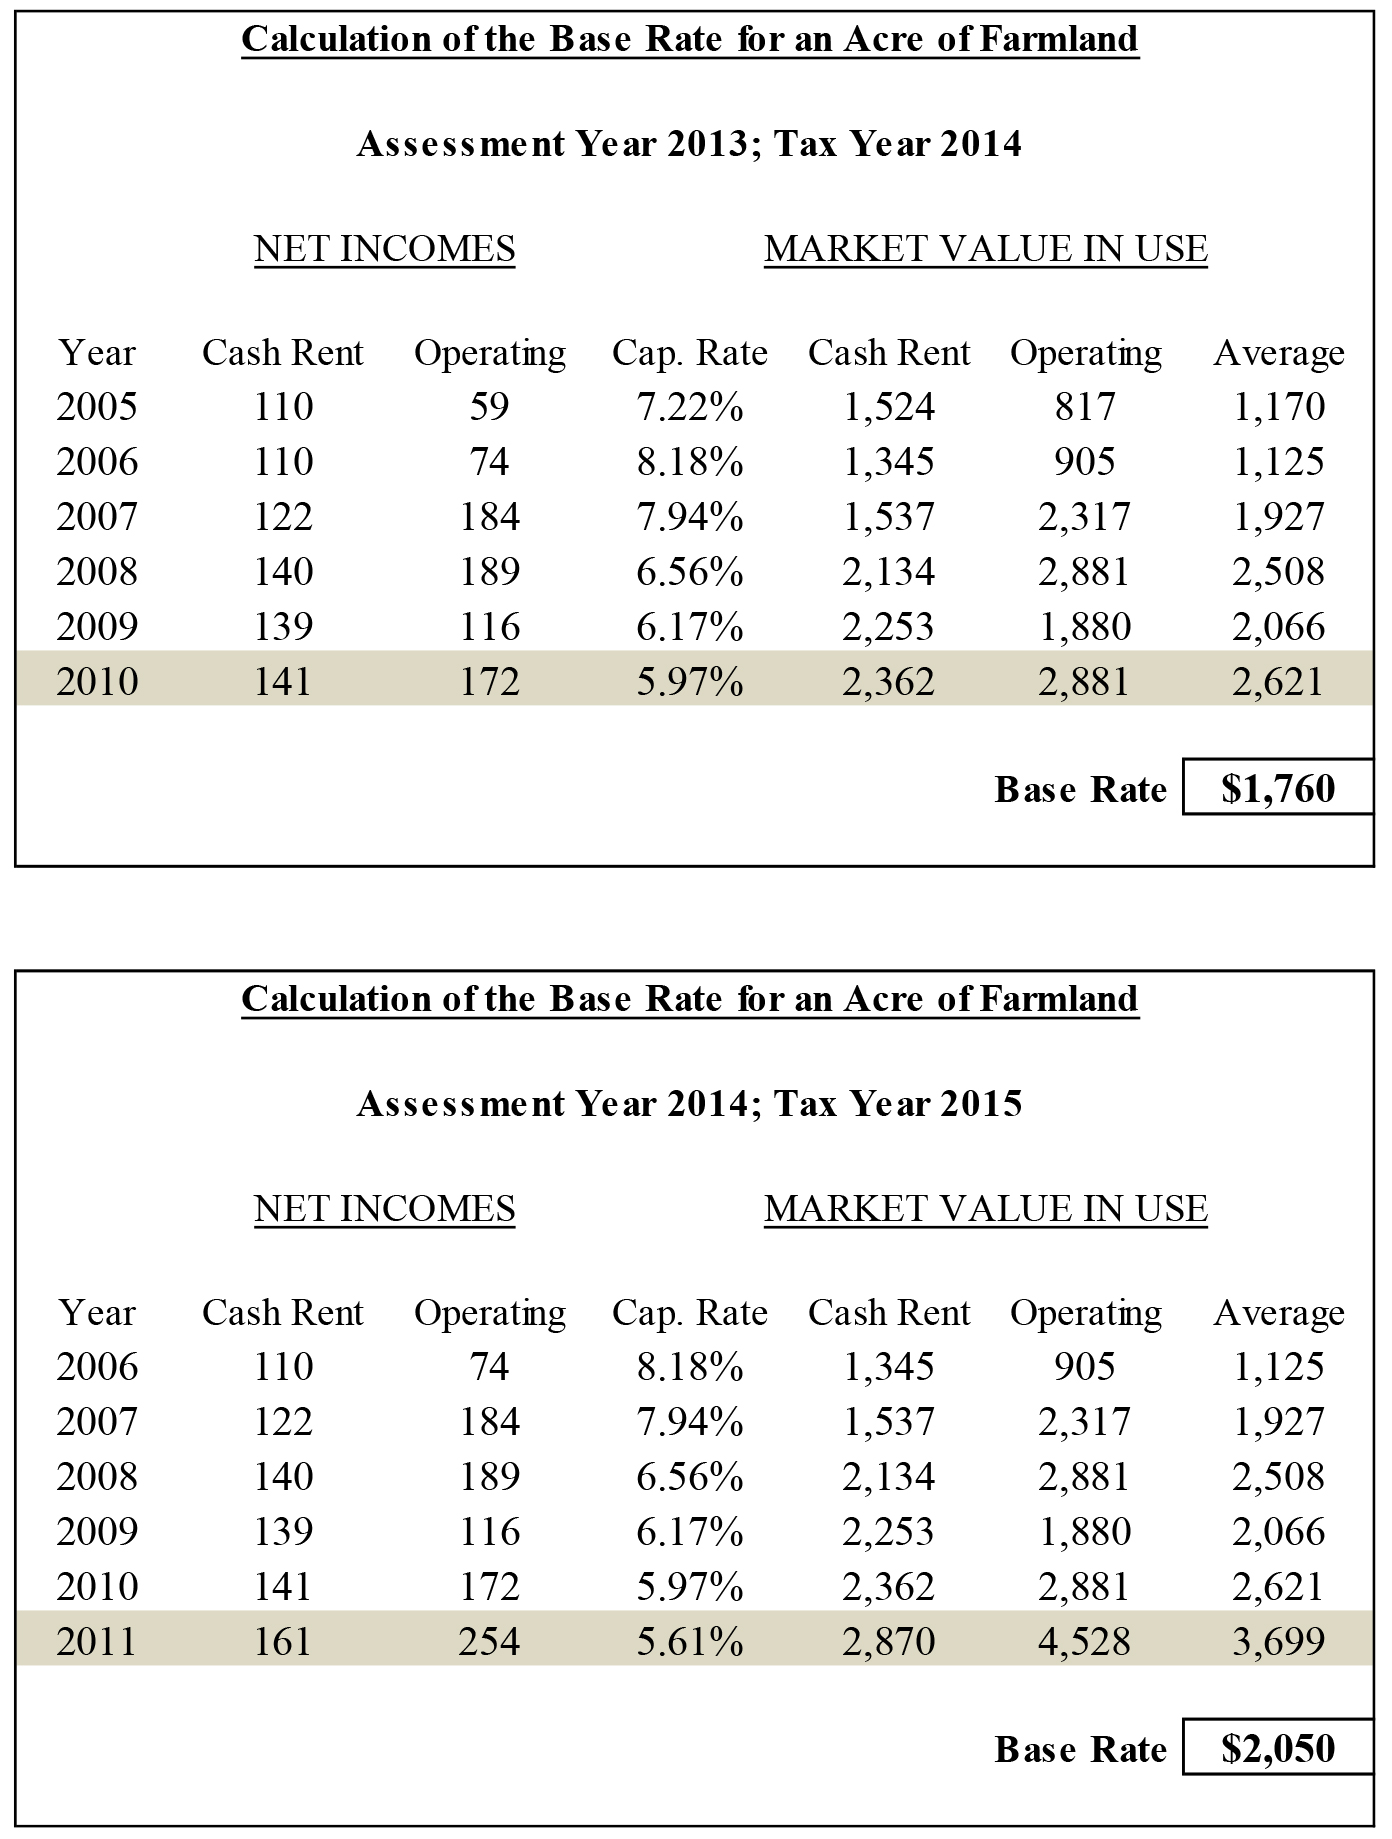 Table 1. Calculation of the Base Rate for Taxes in 2014 and 2015.